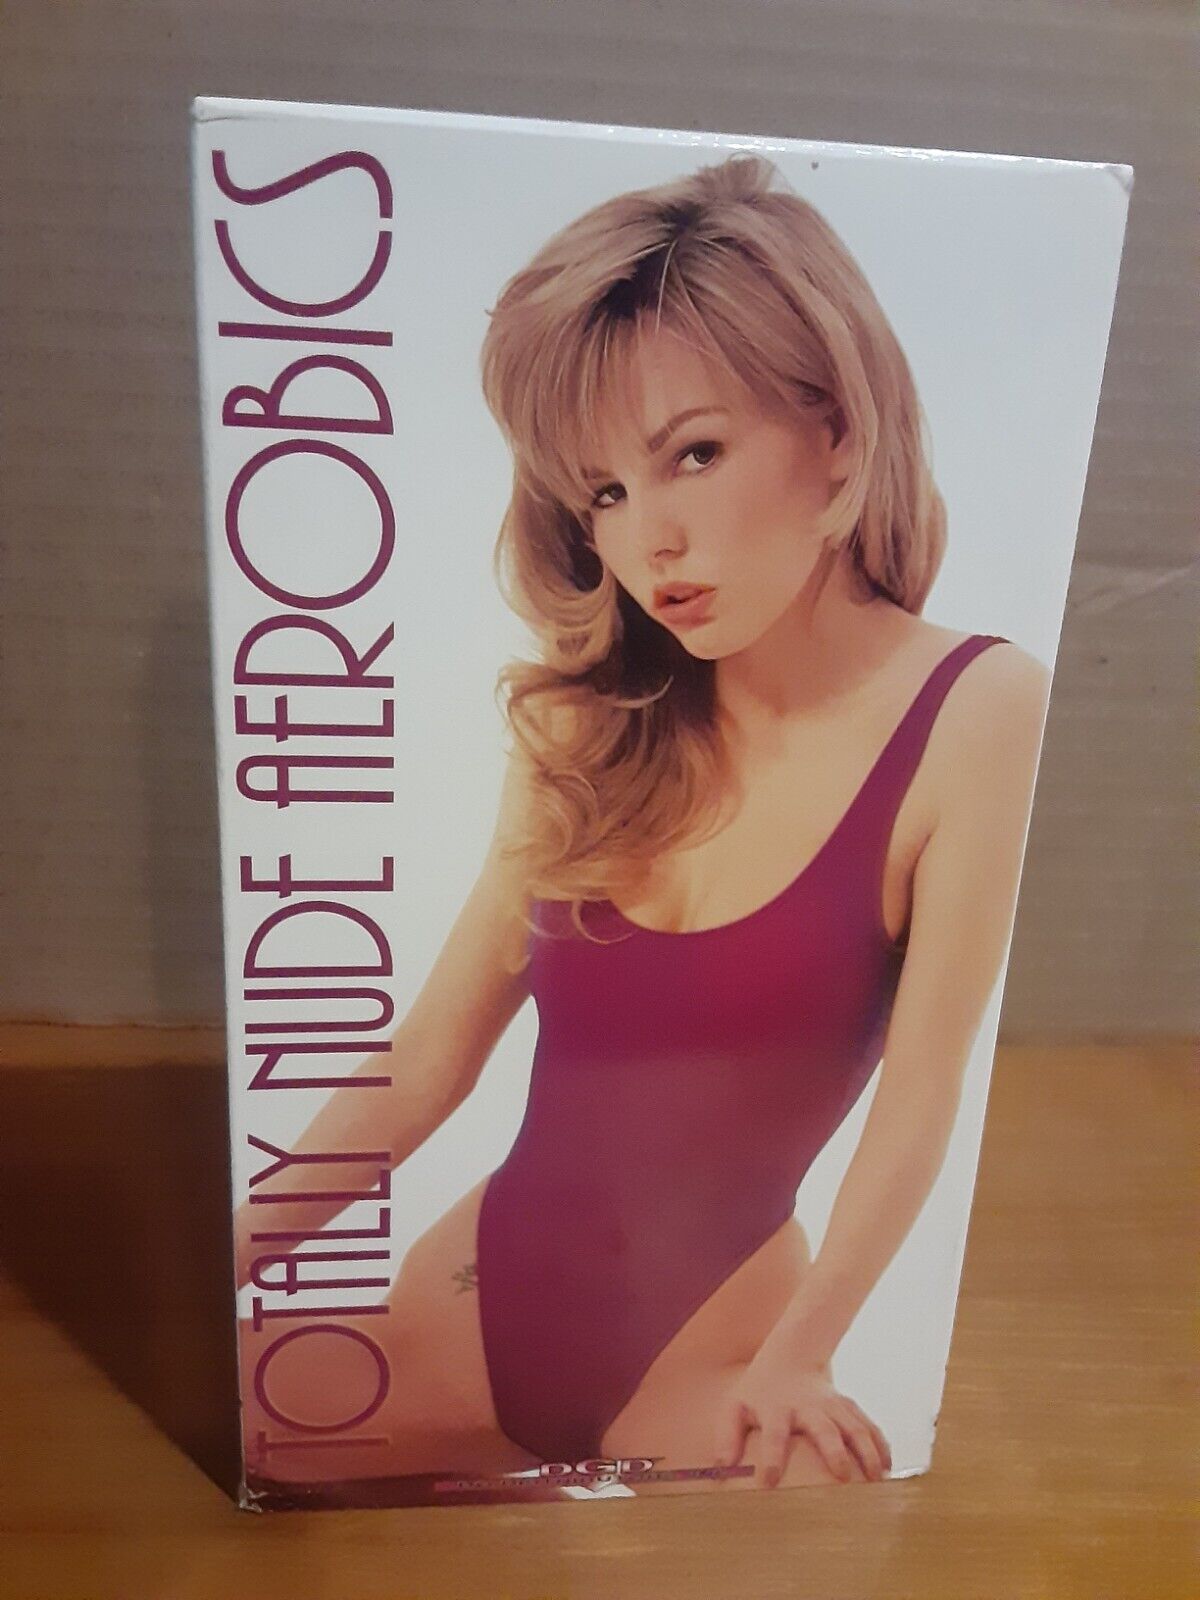 barbara ann burns recommends Totally Nude Aerobics